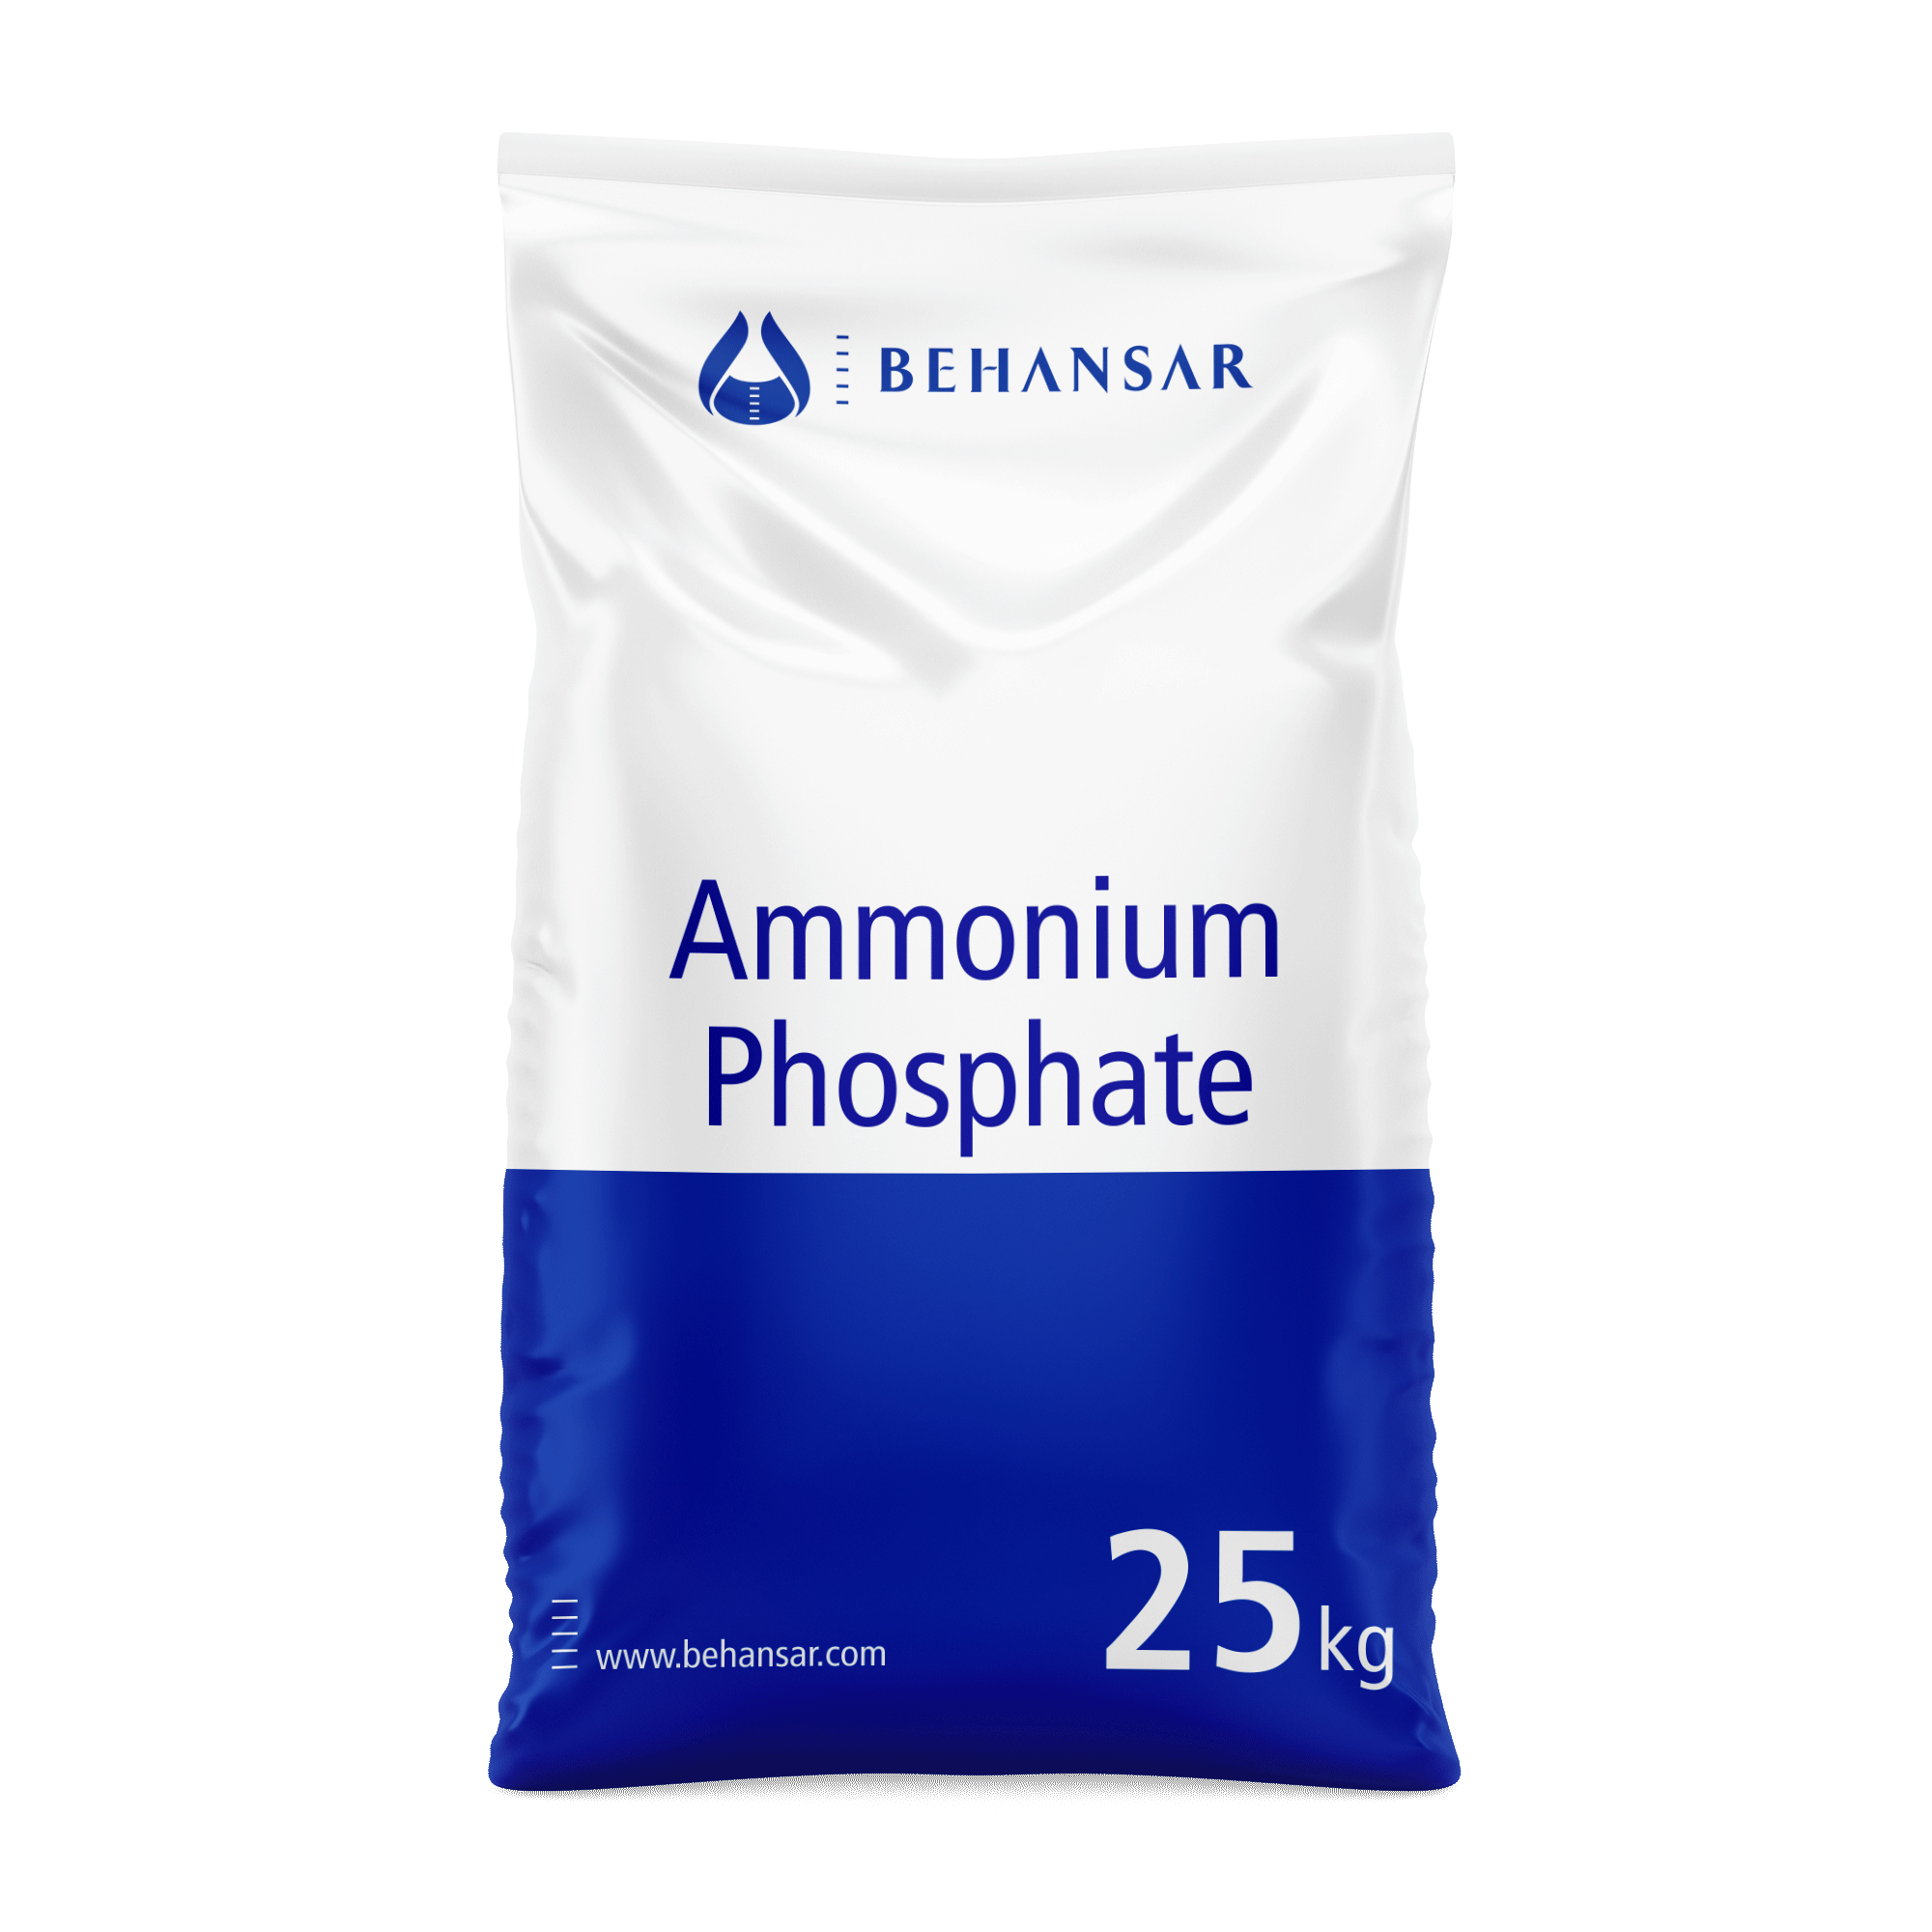 Ammonium Phosphate is one of the products of Behansar Co